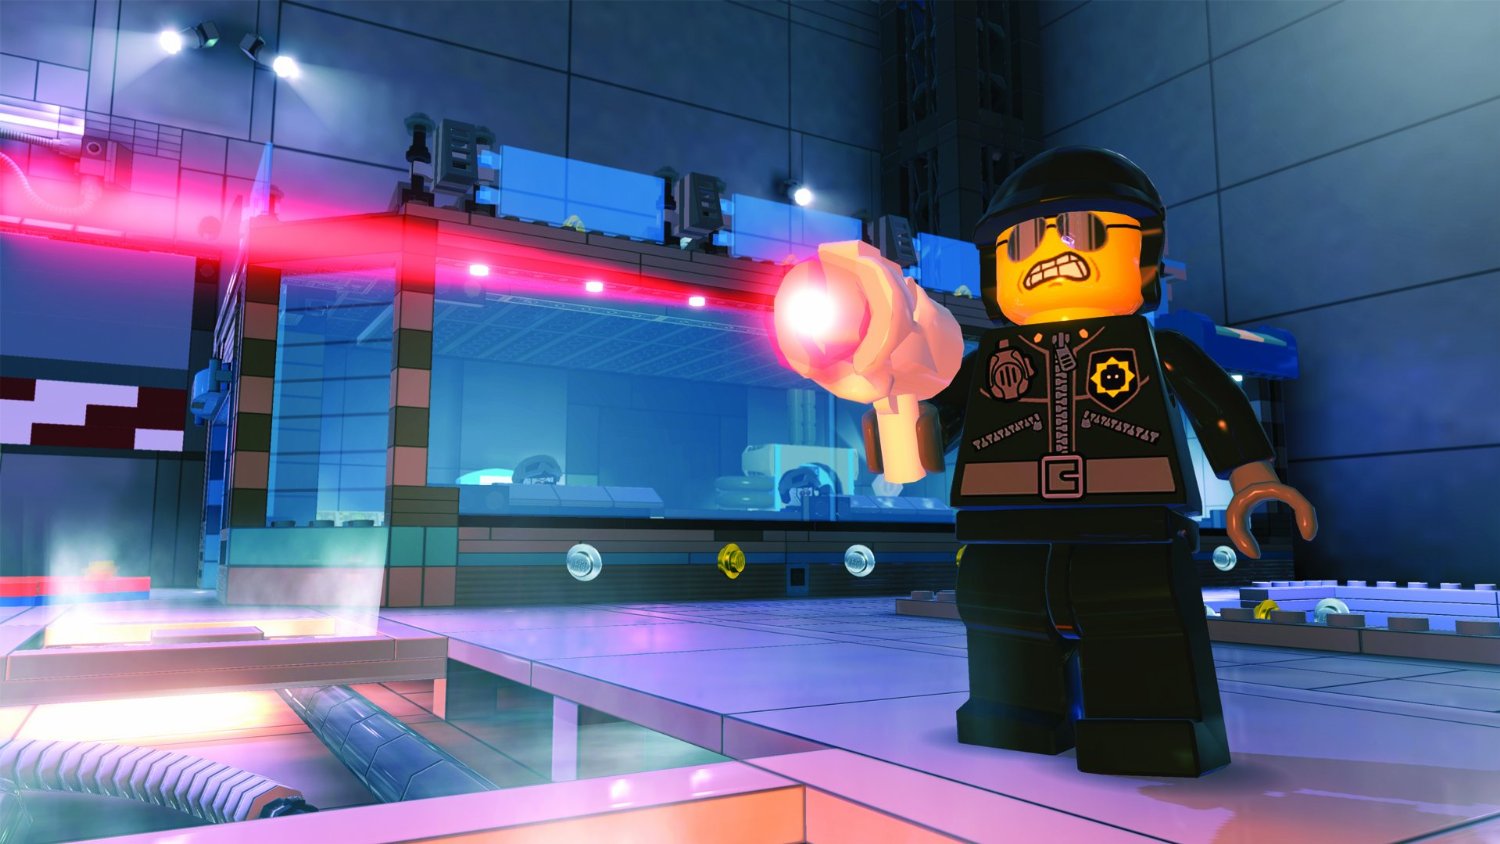 The Lego Movie Videogames